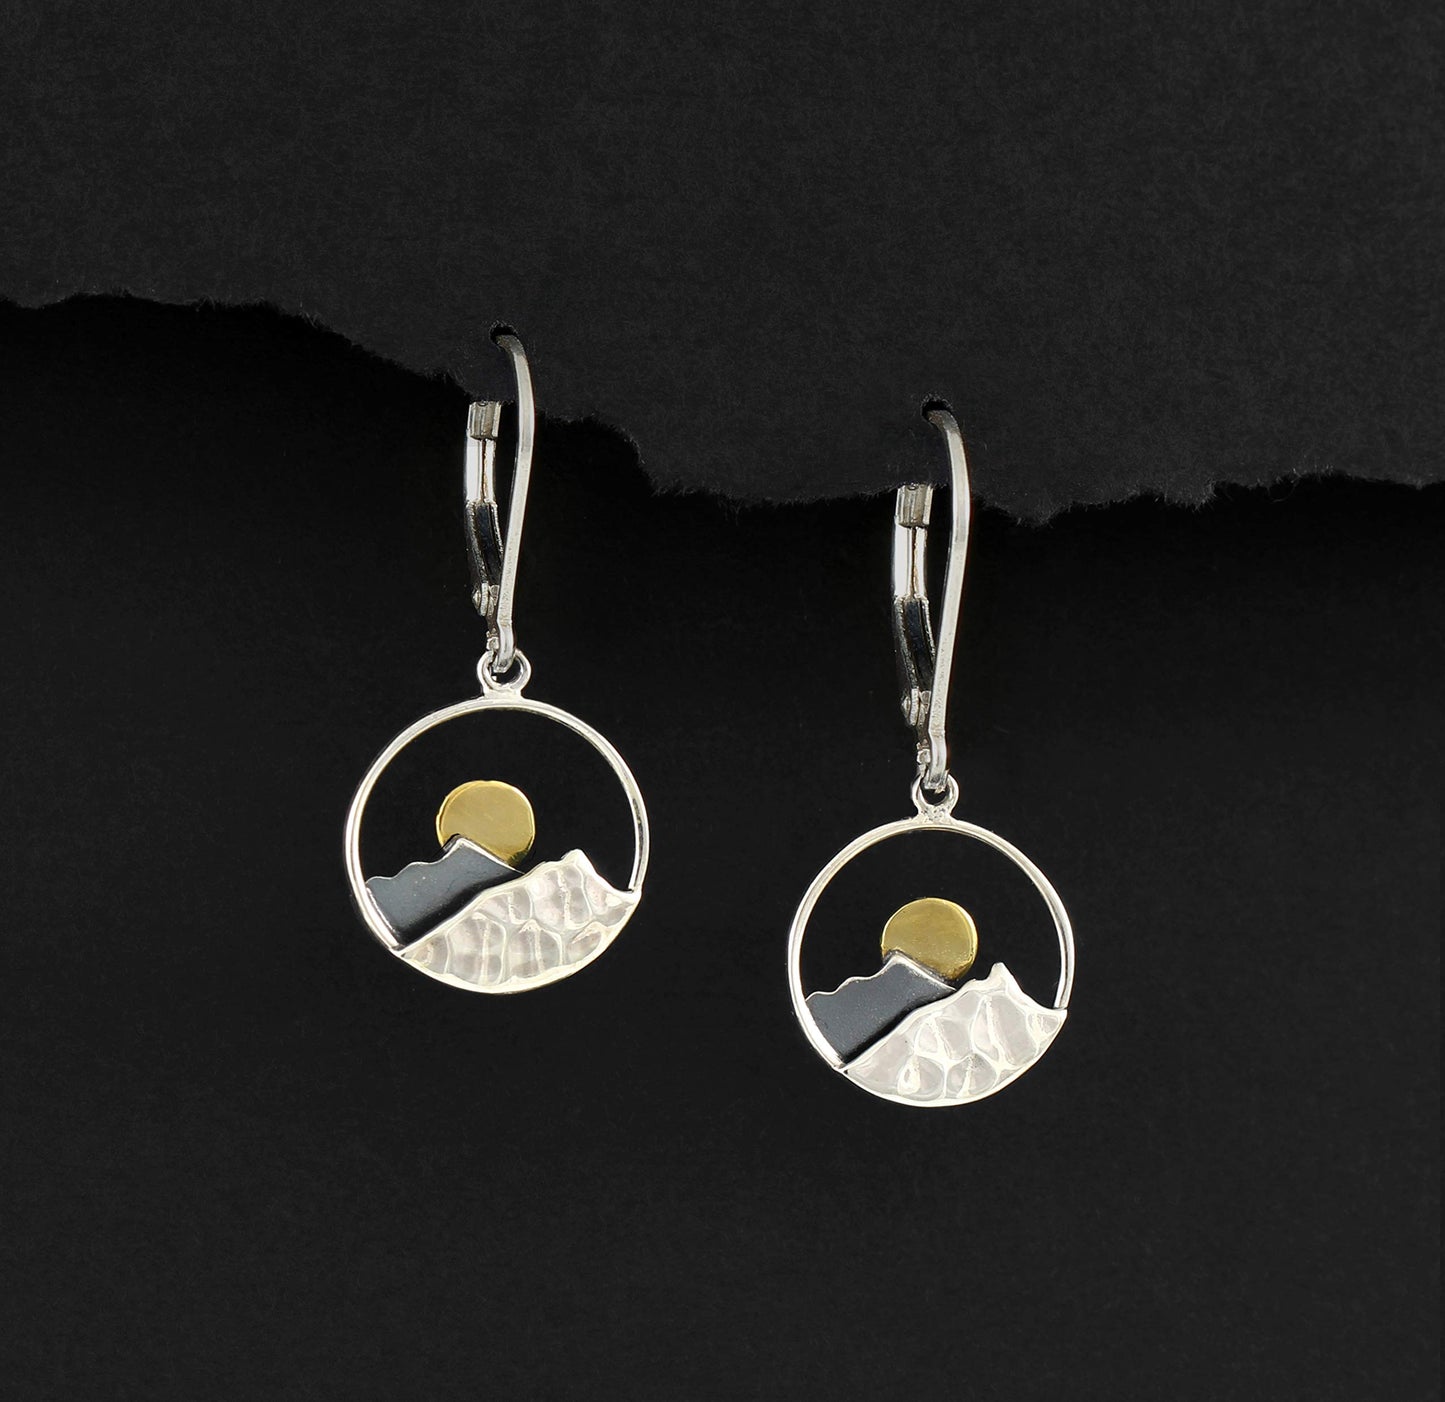 Enjoy the Next Chapter • Congratulations Retirement or Promotion Gift • 925 Sterling Silver • Leverback Style Sun and Mountain Earrings • Service Appreciation Gratitude • New Job • Woman Coworker